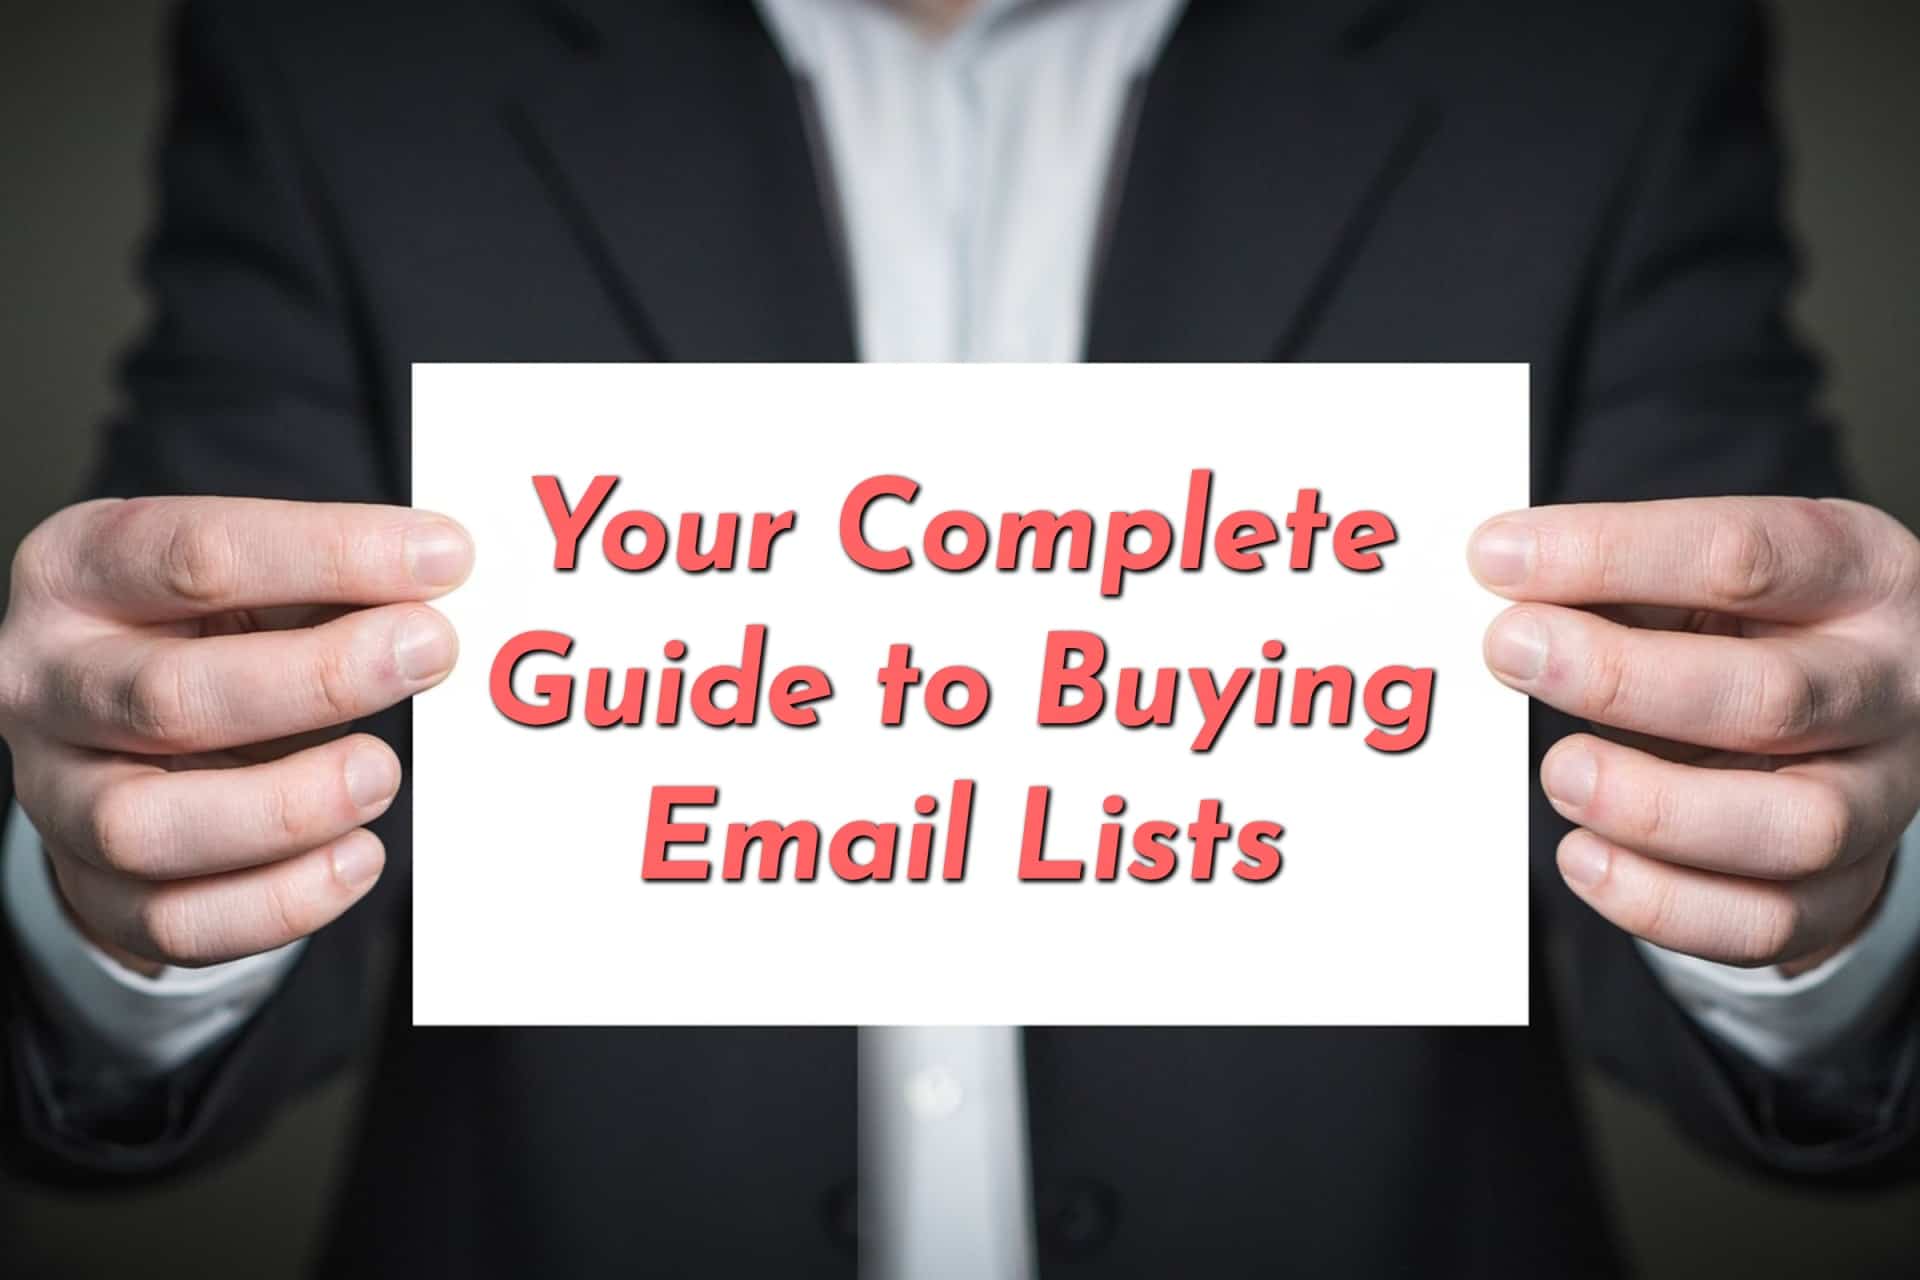 Man holding a sig reading Your Complete Guide to Buying Email Lists